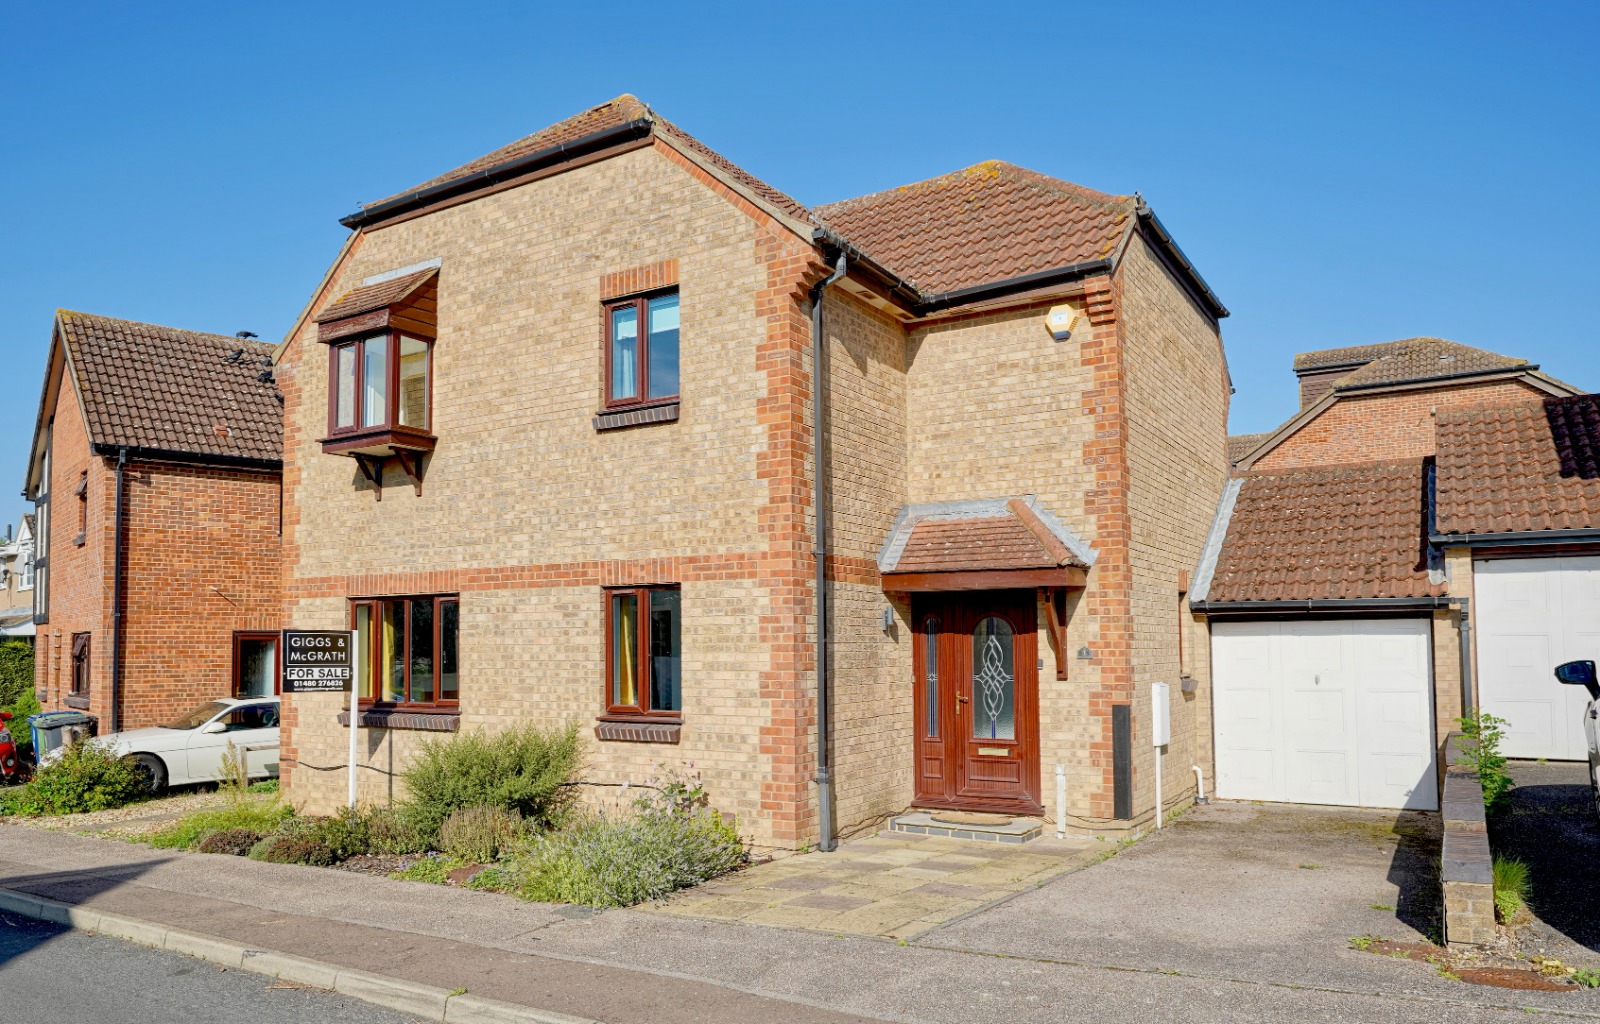 4 bed link detached house for sale in Byfield Road, Cambridge - Property Image 1